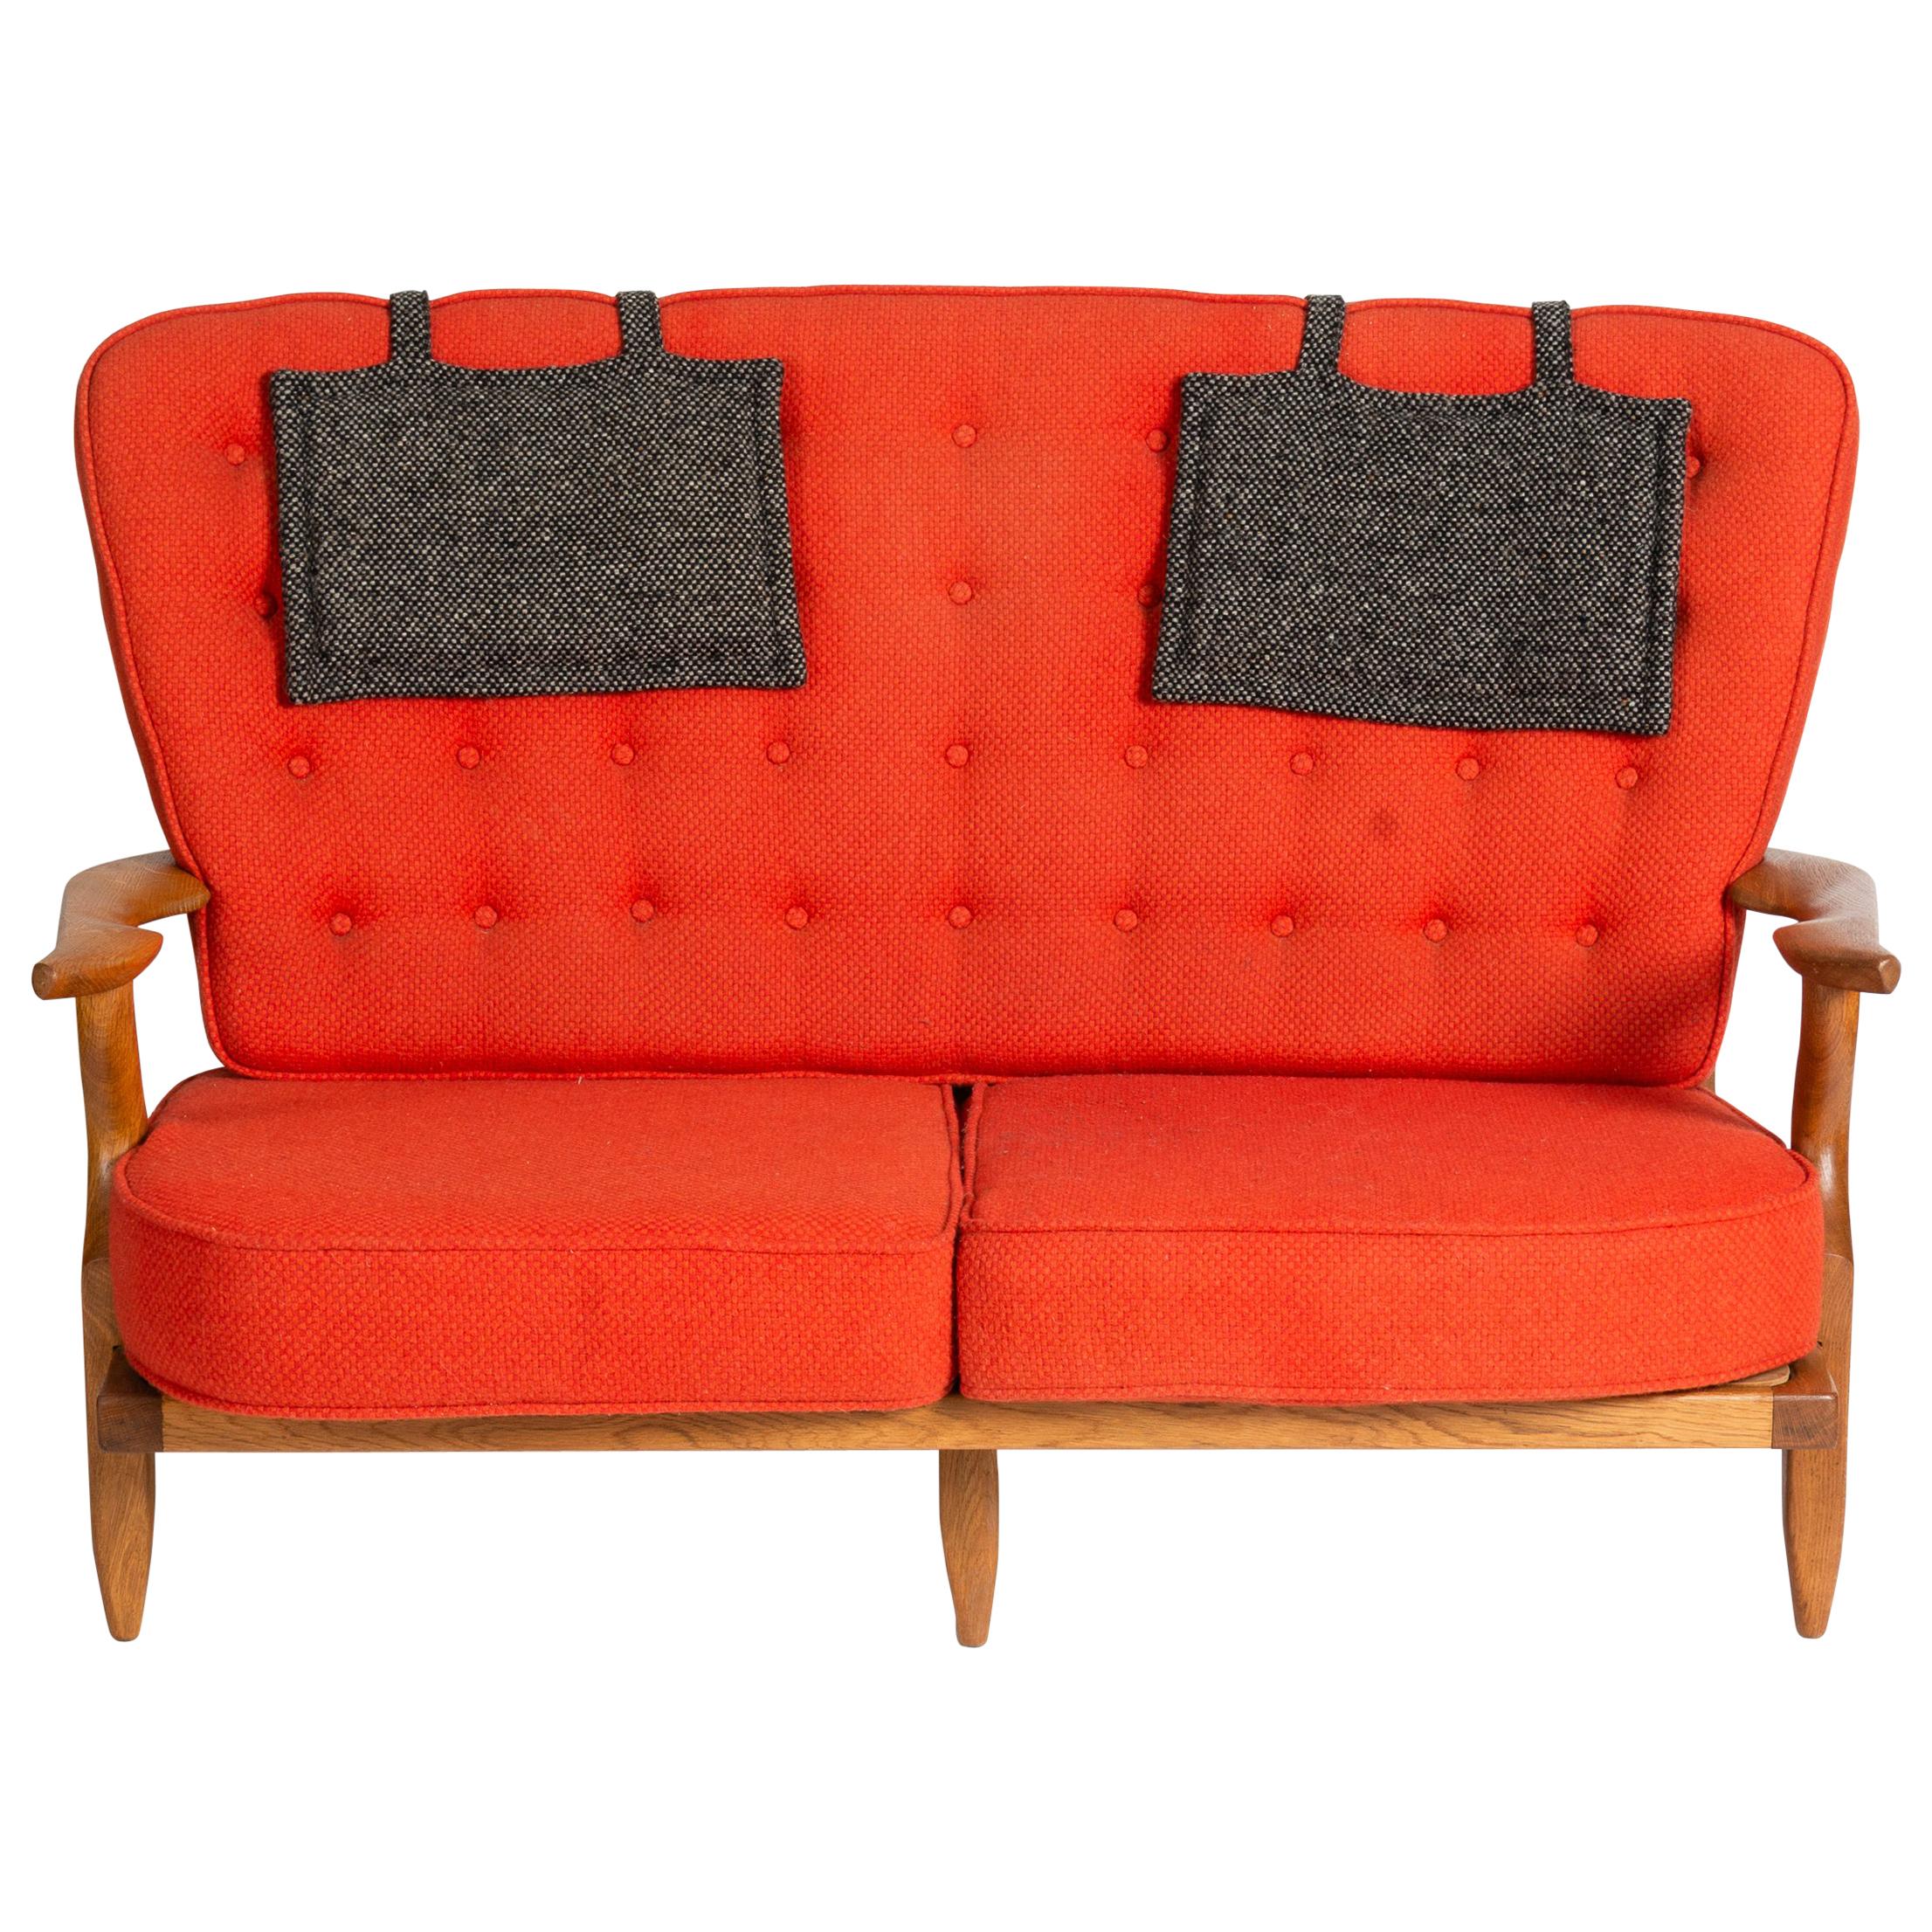 Guillerme et Chambron, Banquette Grand Repos, Two-Seater Settee, Circa 1960